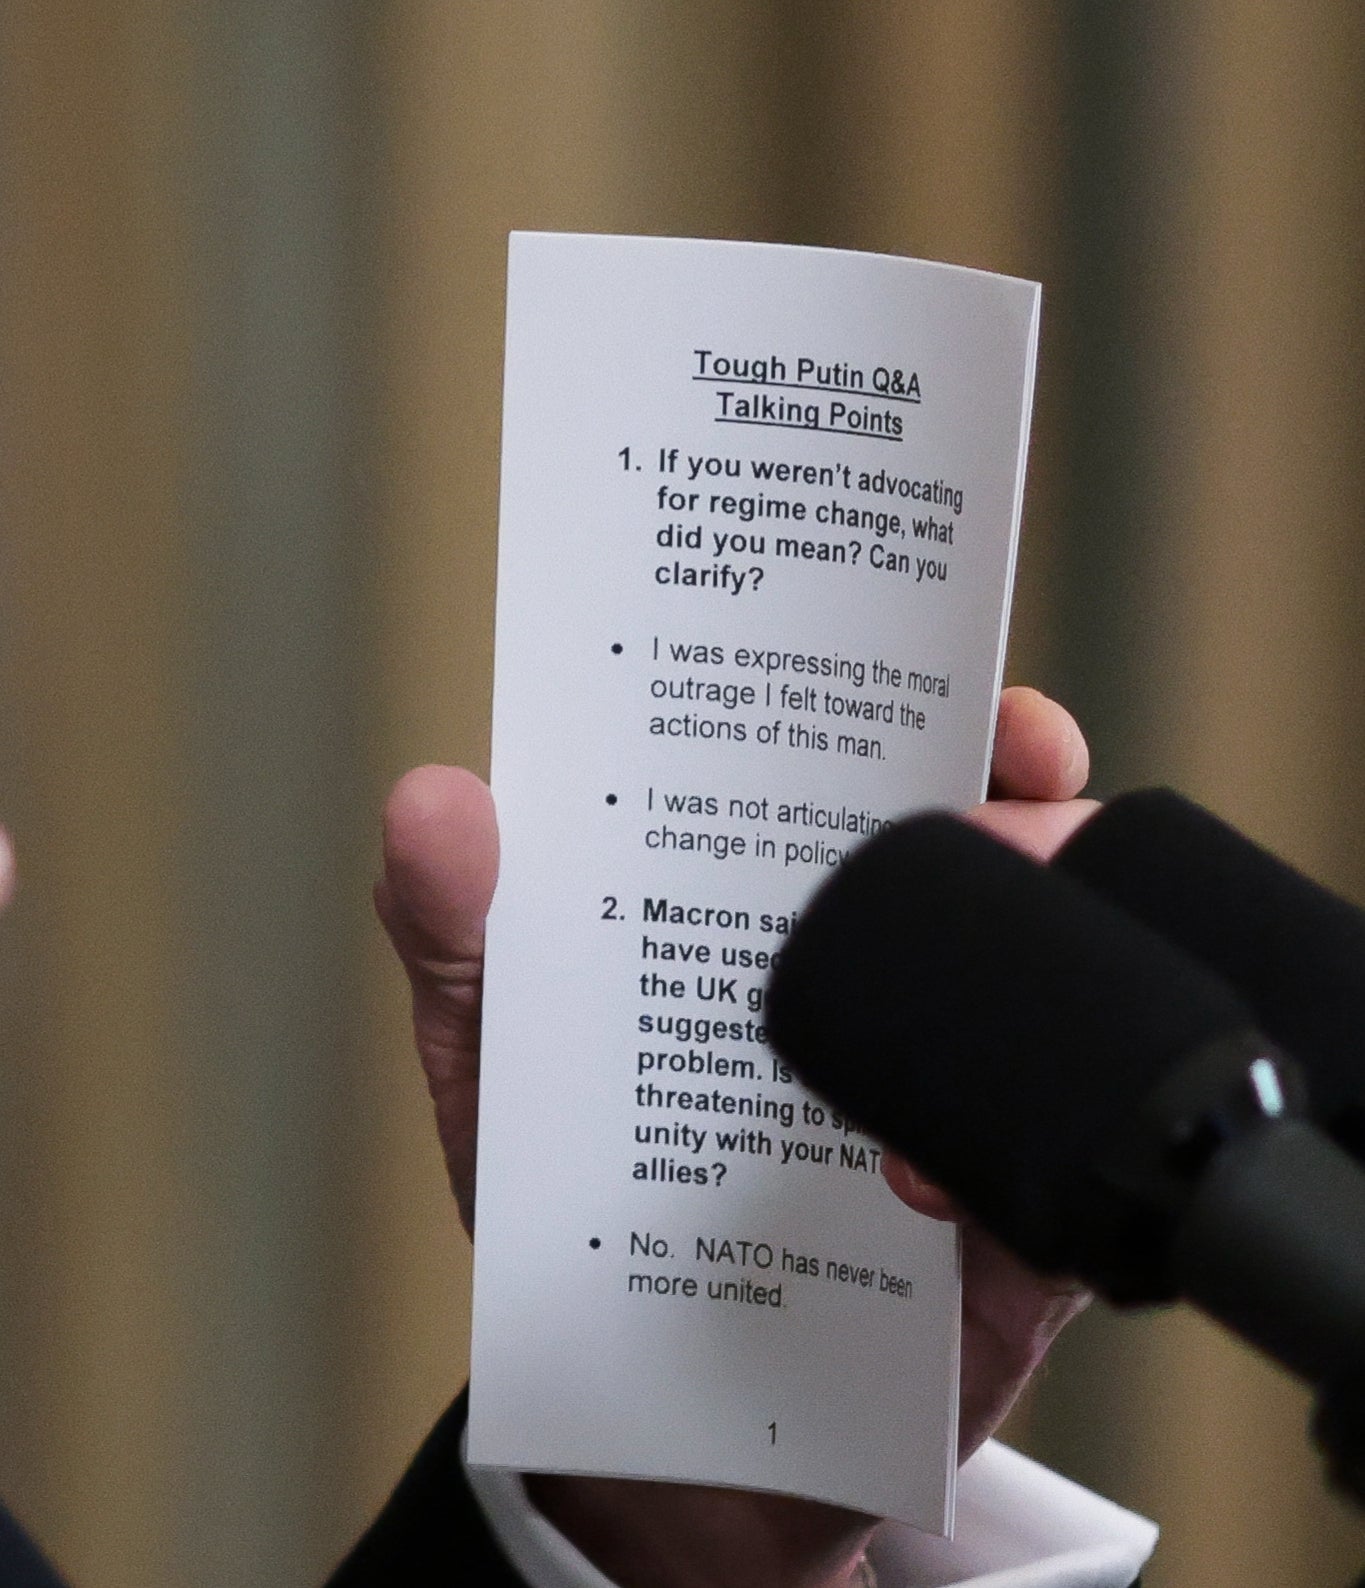 The printed paper held by Biden shows talking points related to his comments on Vladimir Putin and Nato